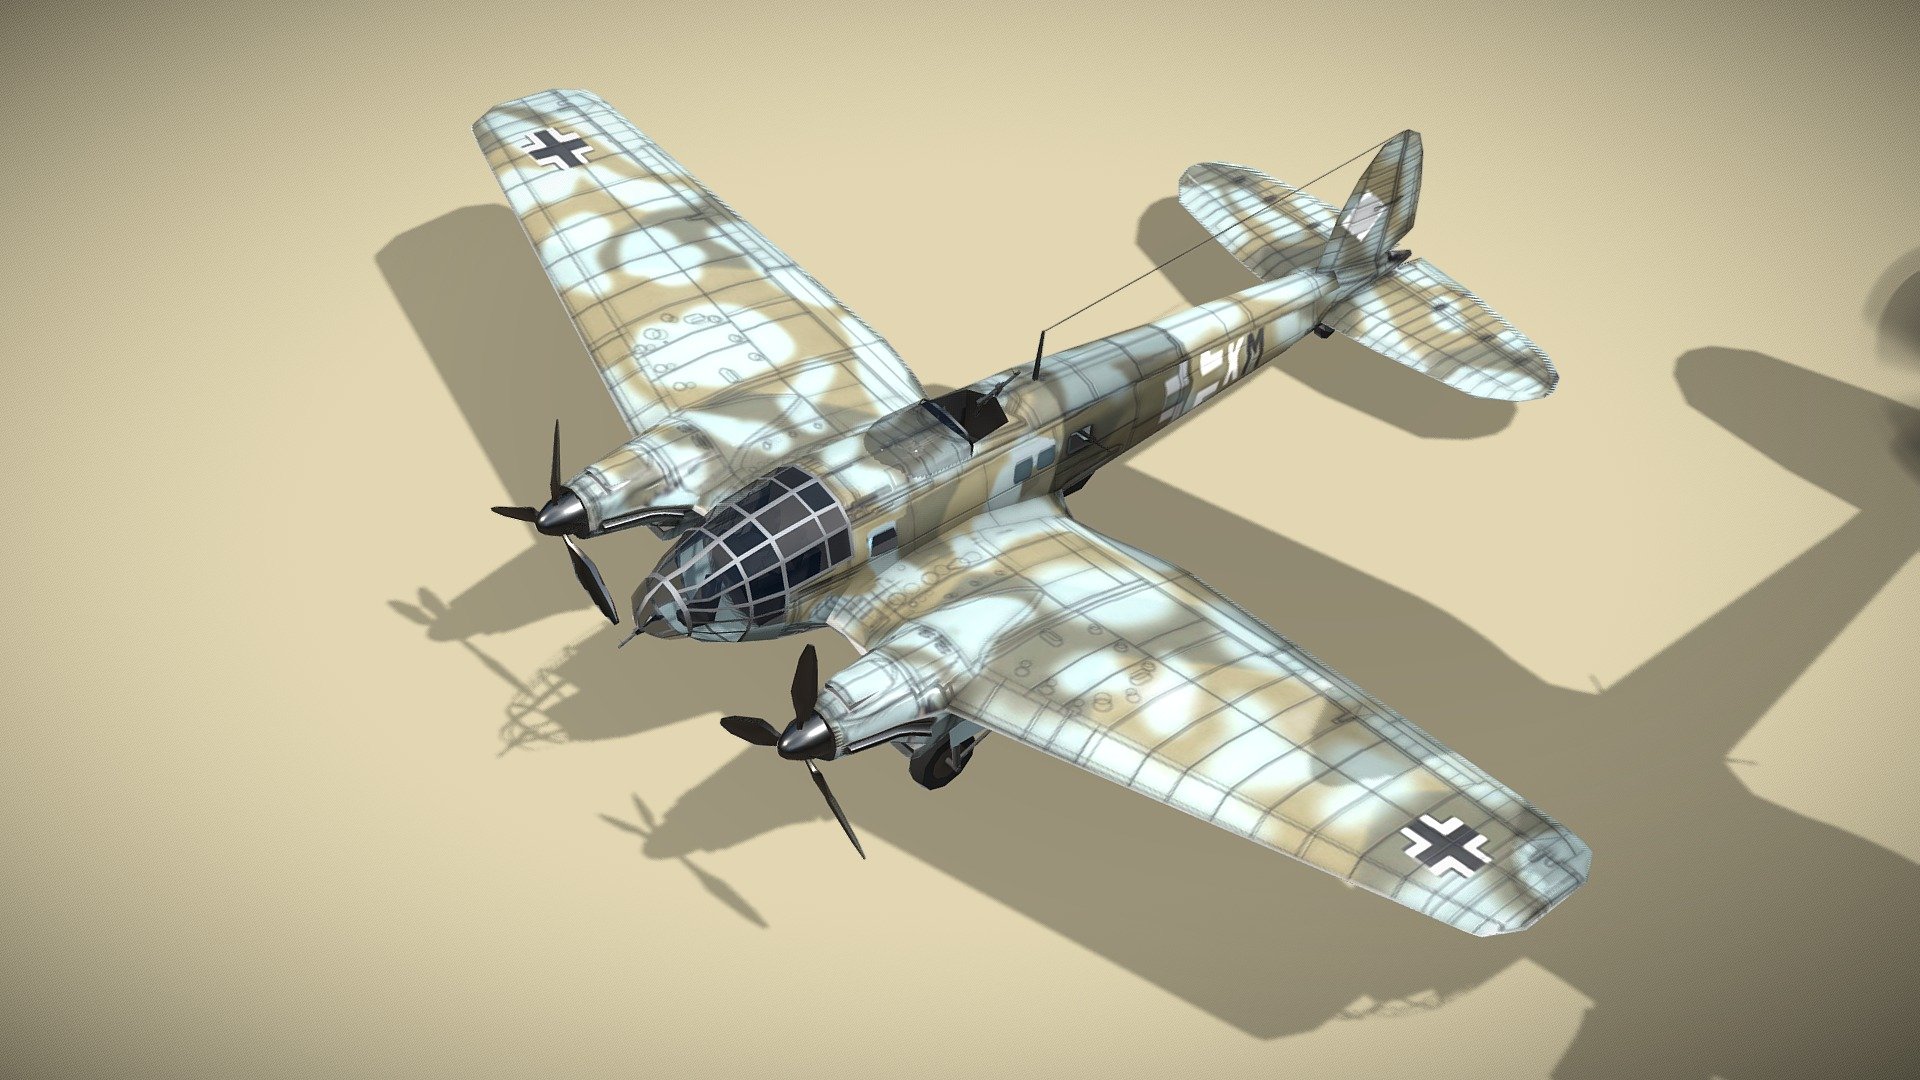 Heinkel He-111

Lowpoly model of german WW2 bomber



Heinkel He 111 was a German bomber aircraft designed in 1934. Through development it was described as a &ldquo;wolf in sheep's clothing